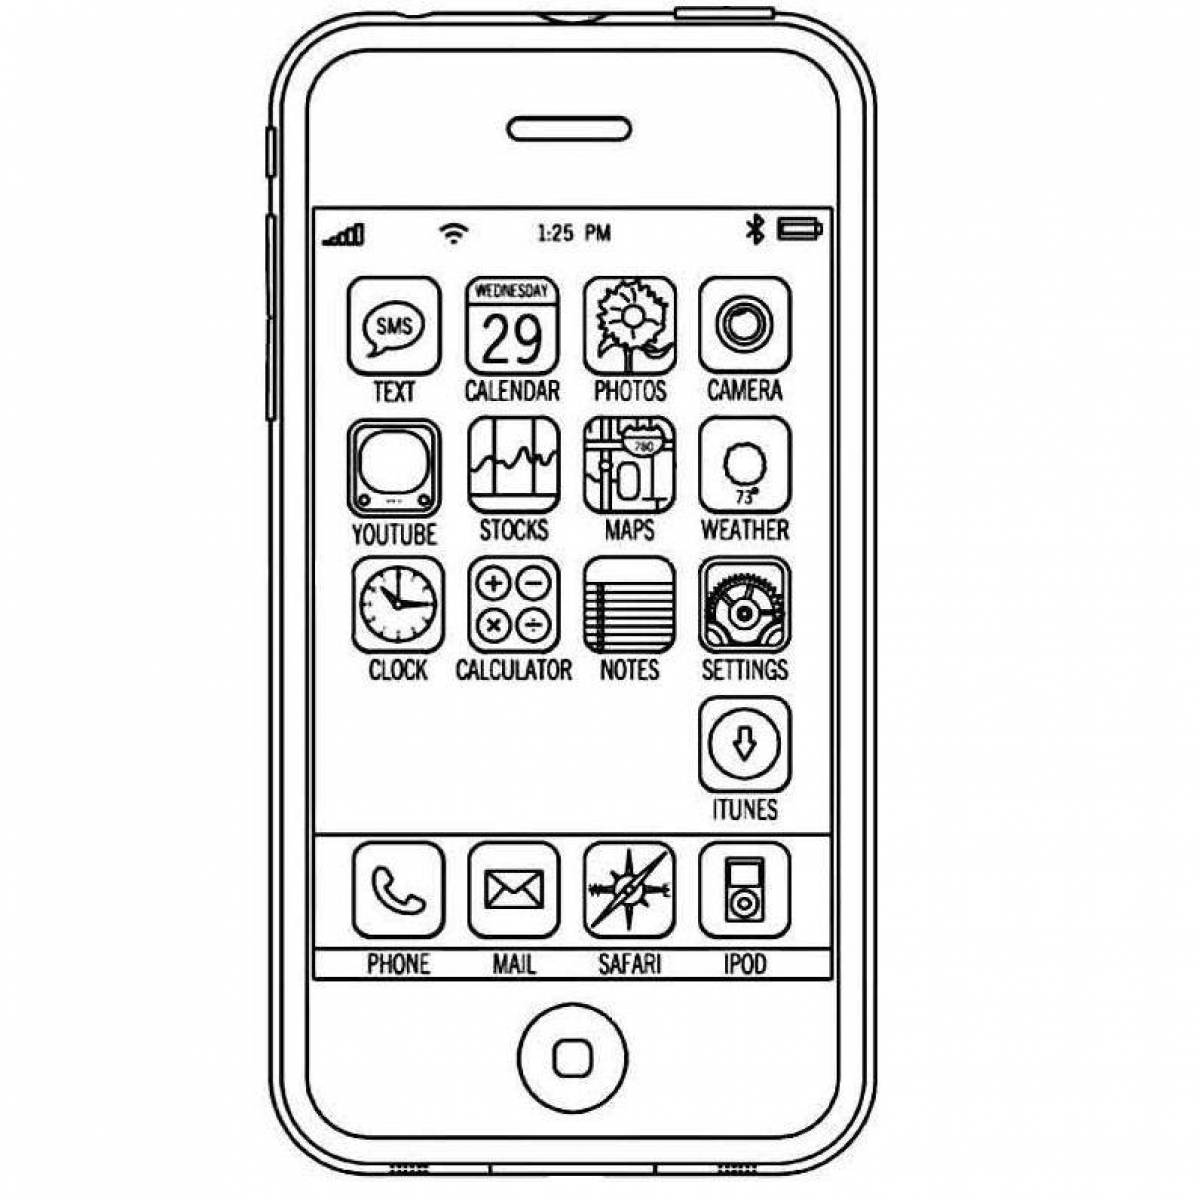 Impressive mobile phone coloring page